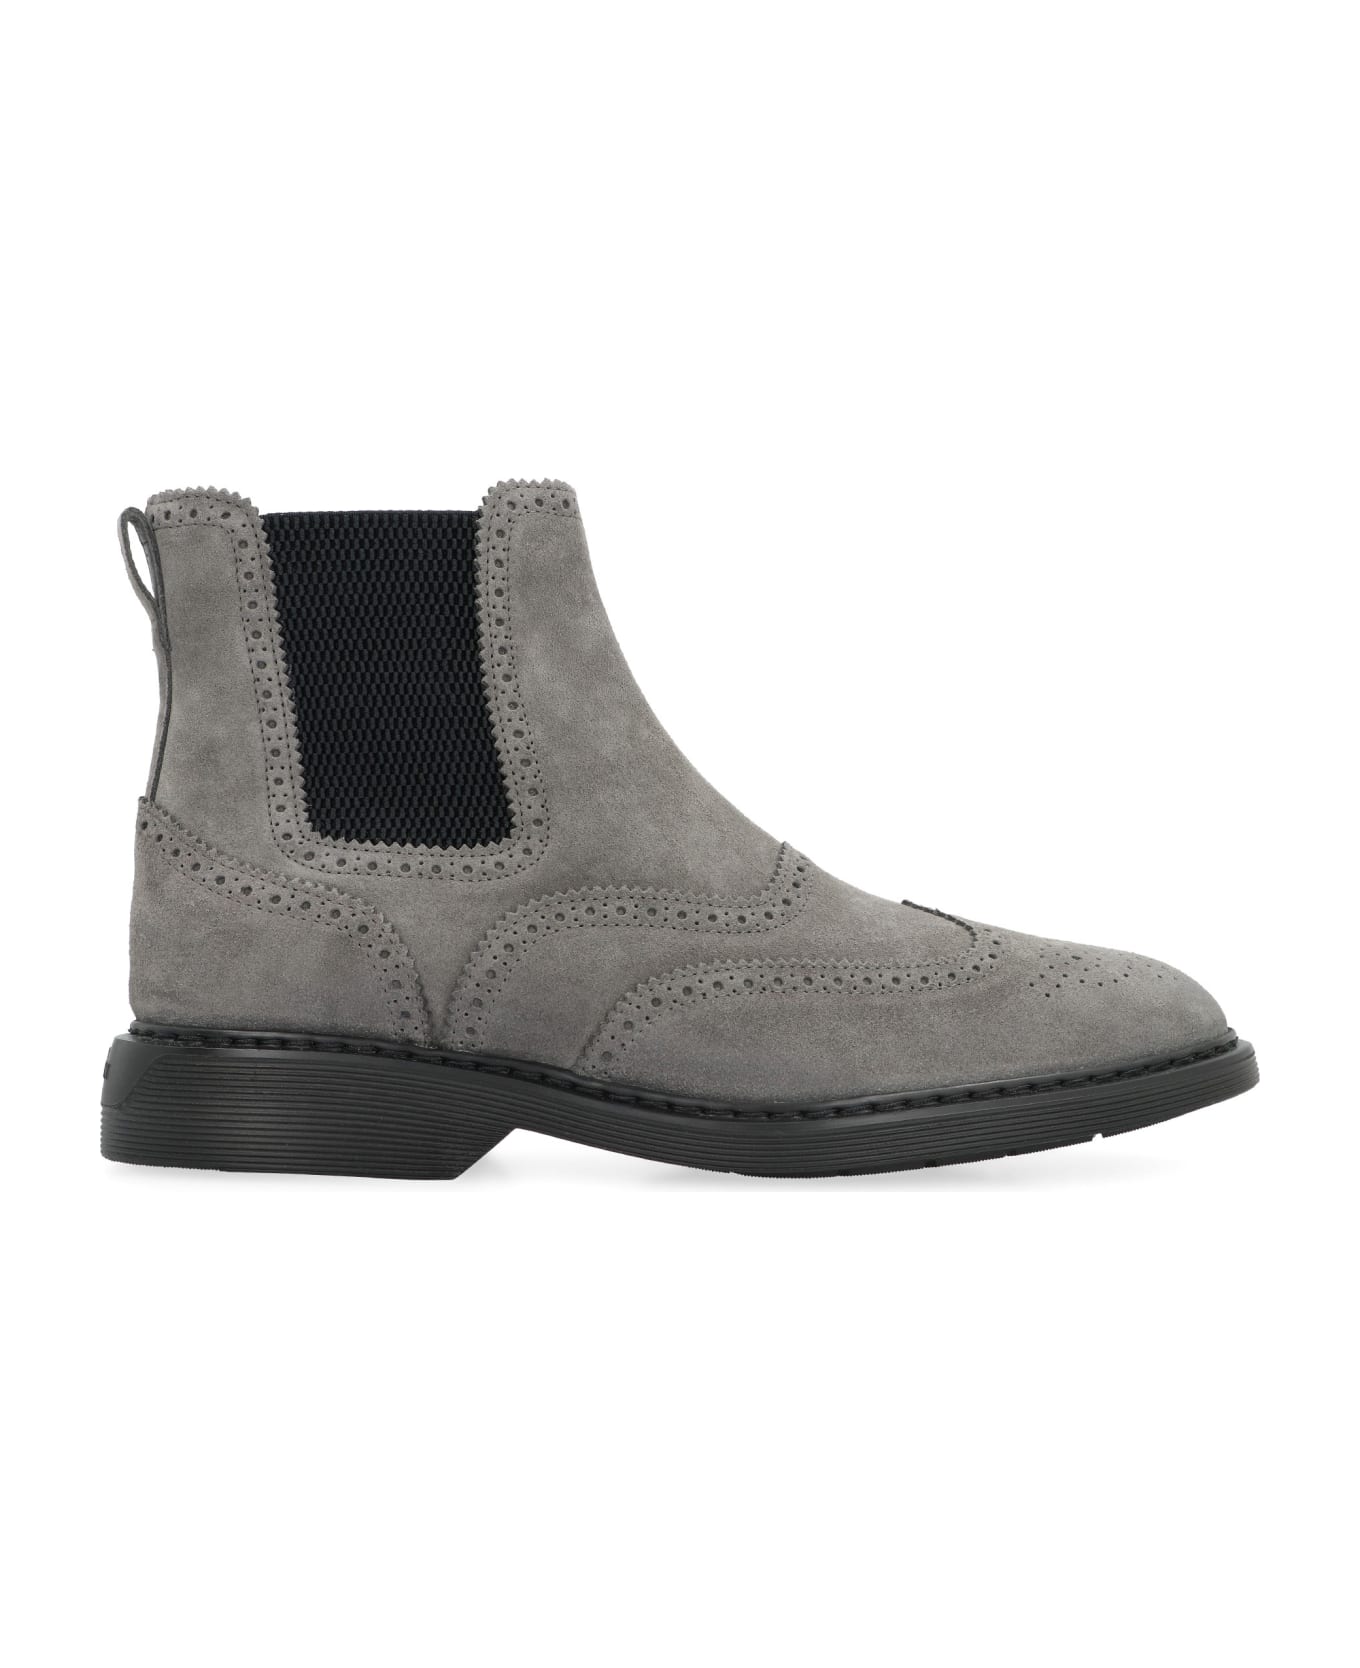 Hogan Leather Ankle Boot - grey ブーツ